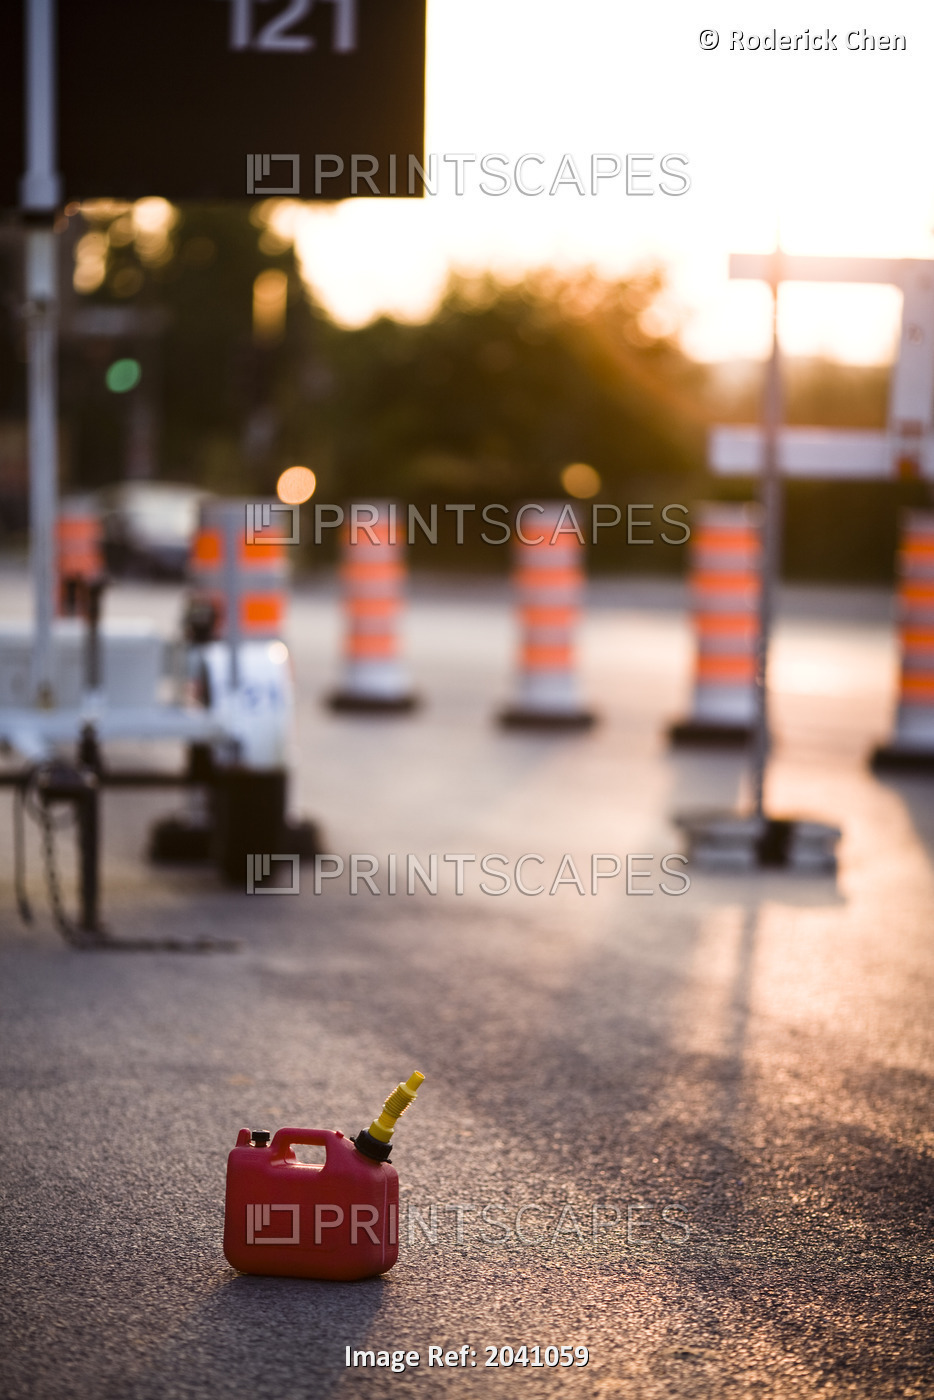 Portable Plastic Gas Can At The Entrance Of A Highway On Ramp, Montreal, Quebec